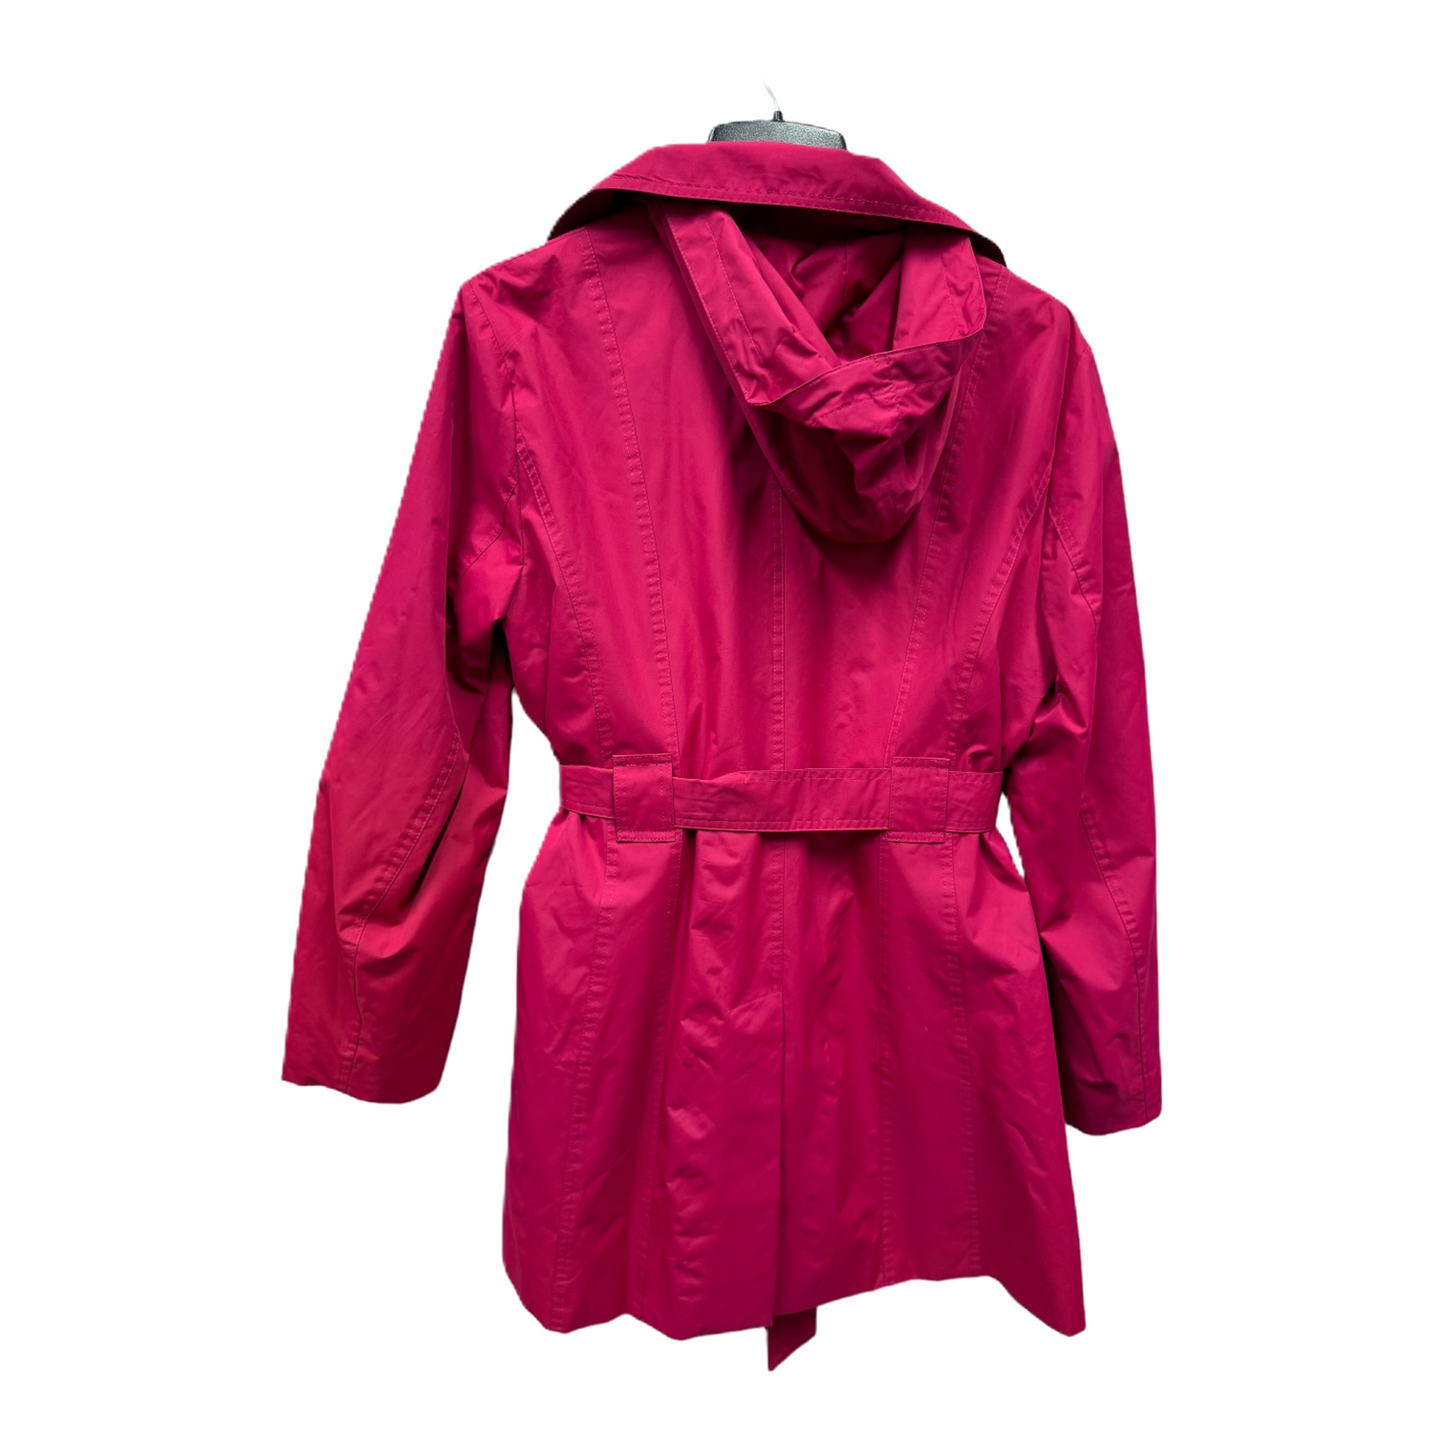 Red Coat Raincoat By Croft And Barrow, Size: 1x